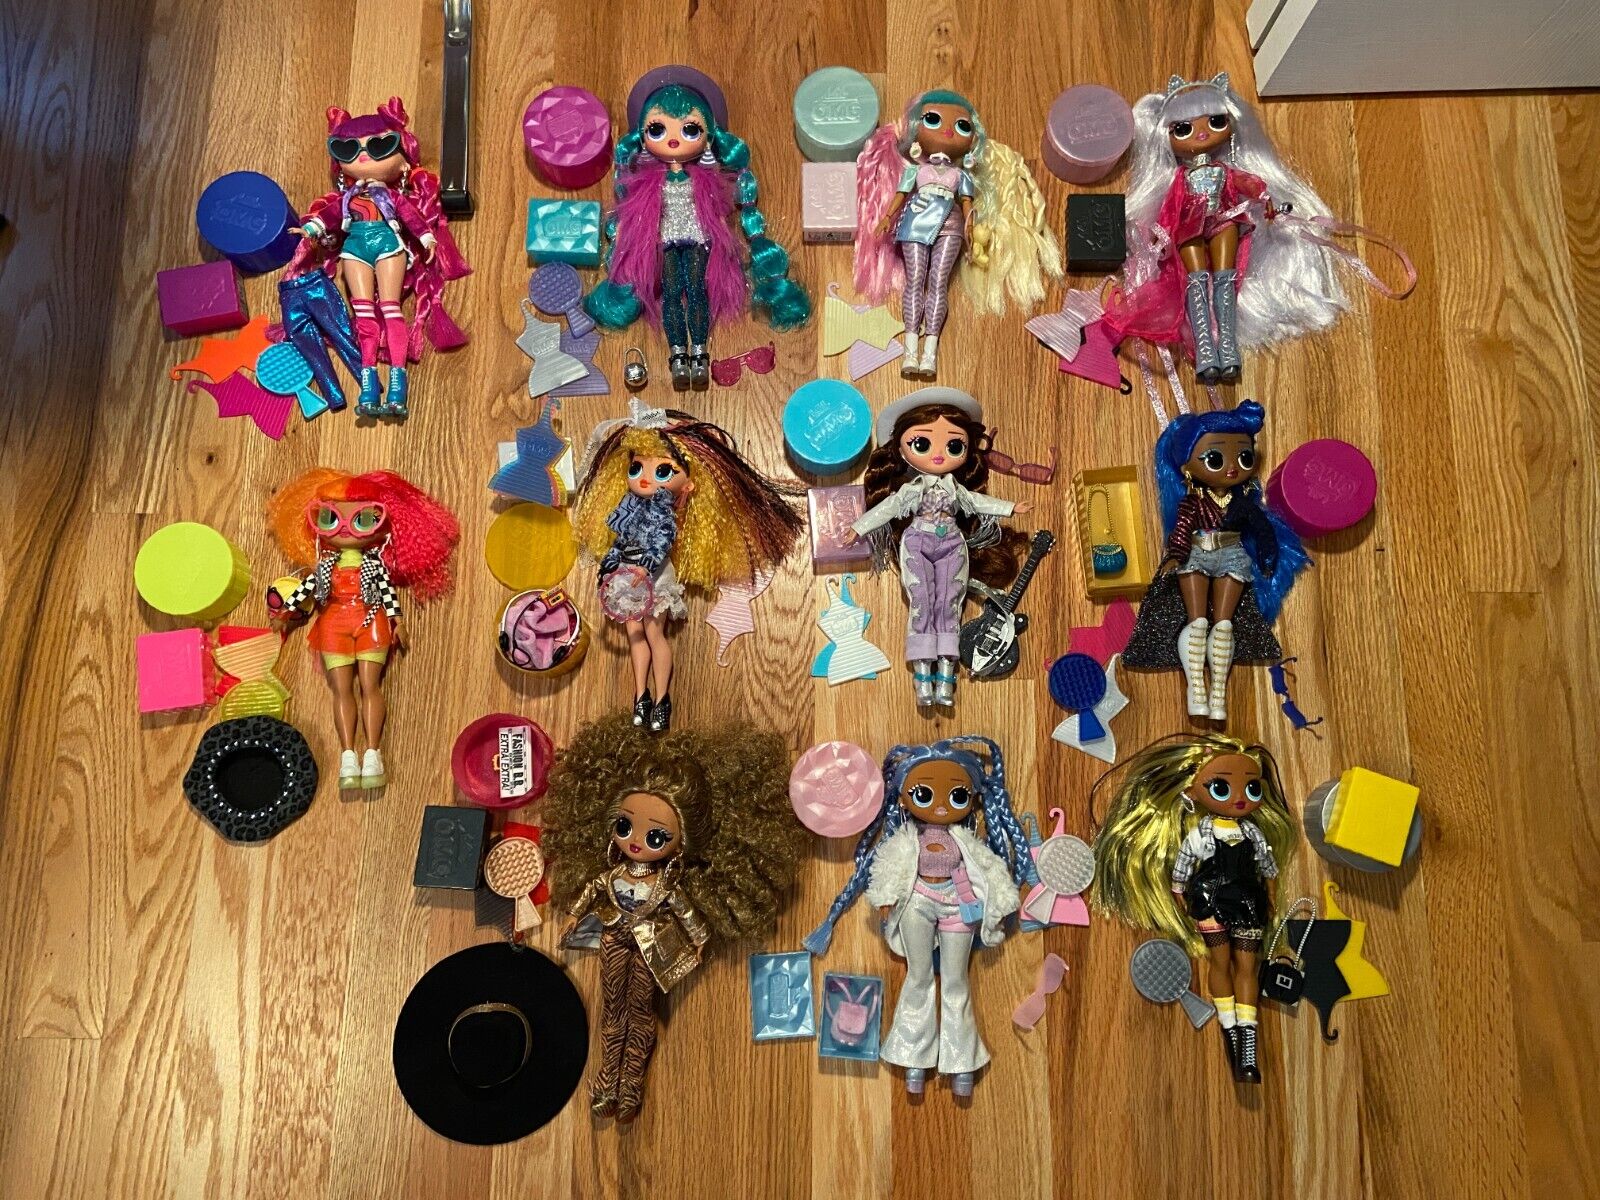 LOL OMG Doll - Lot of 11 Figures & Accessories Candylicious Neonlicious Lonestar